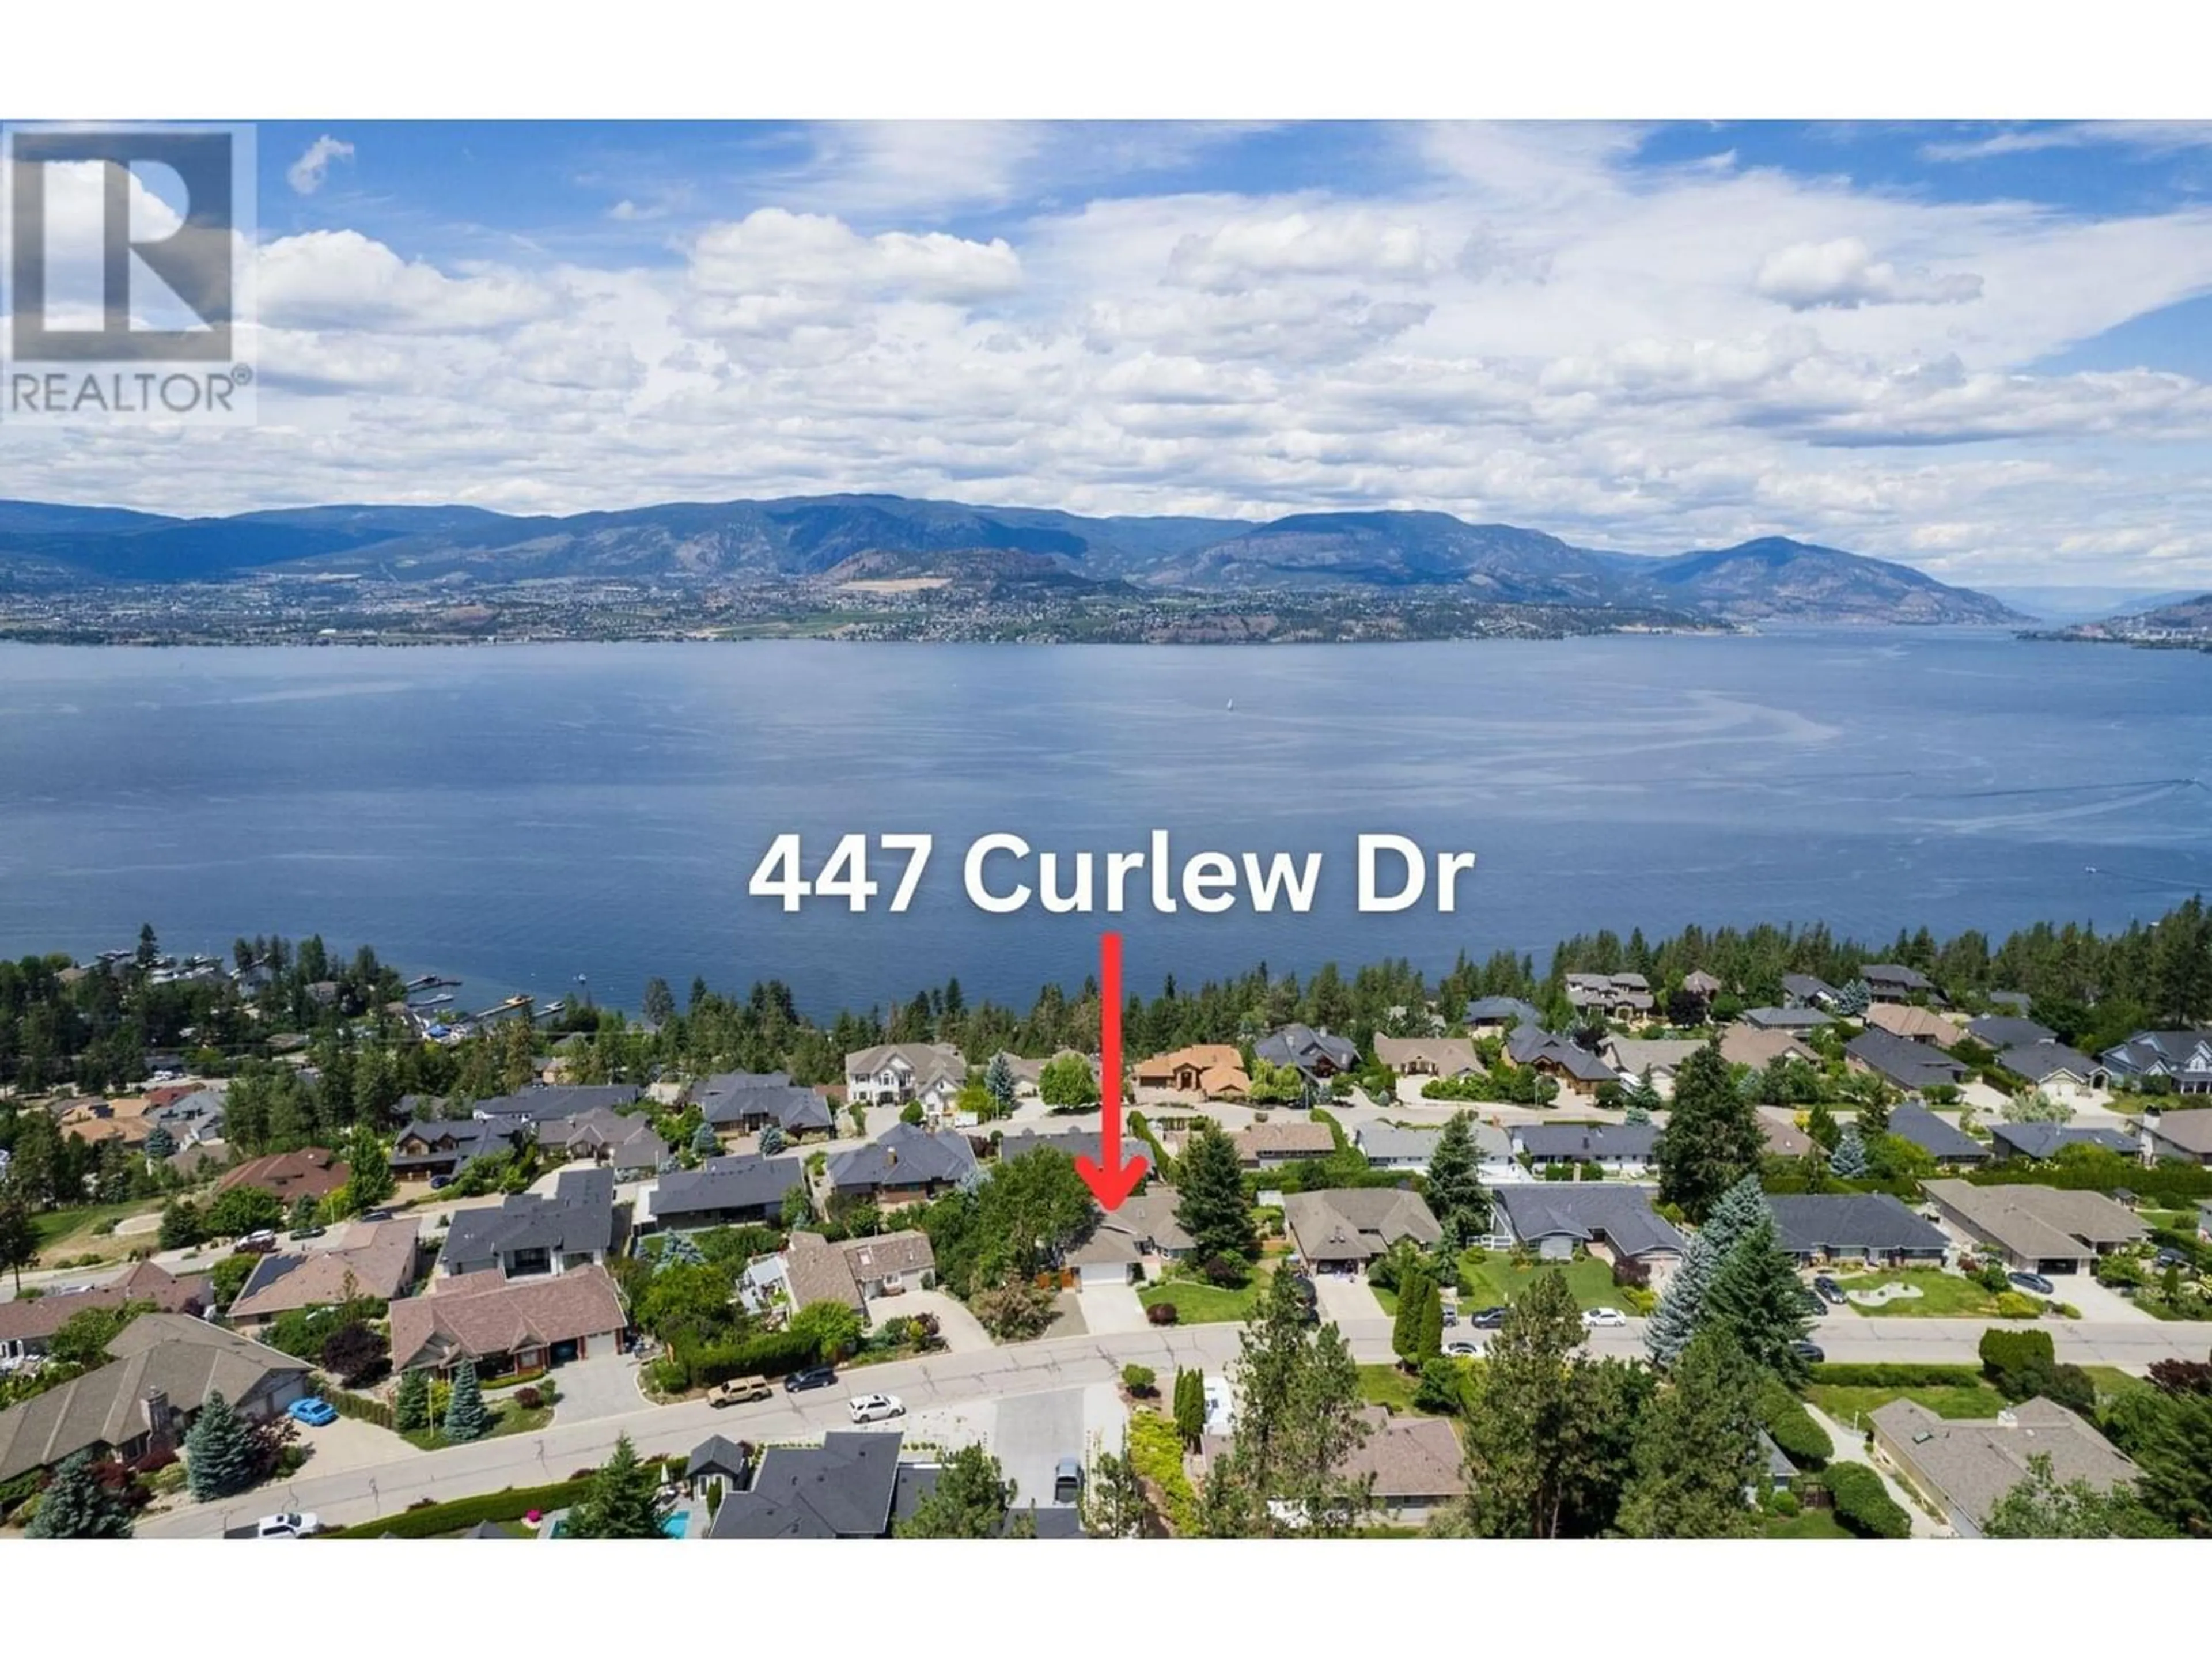 Lakeview for 447 Curlew Drive, Kelowna British Columbia V1W4L2